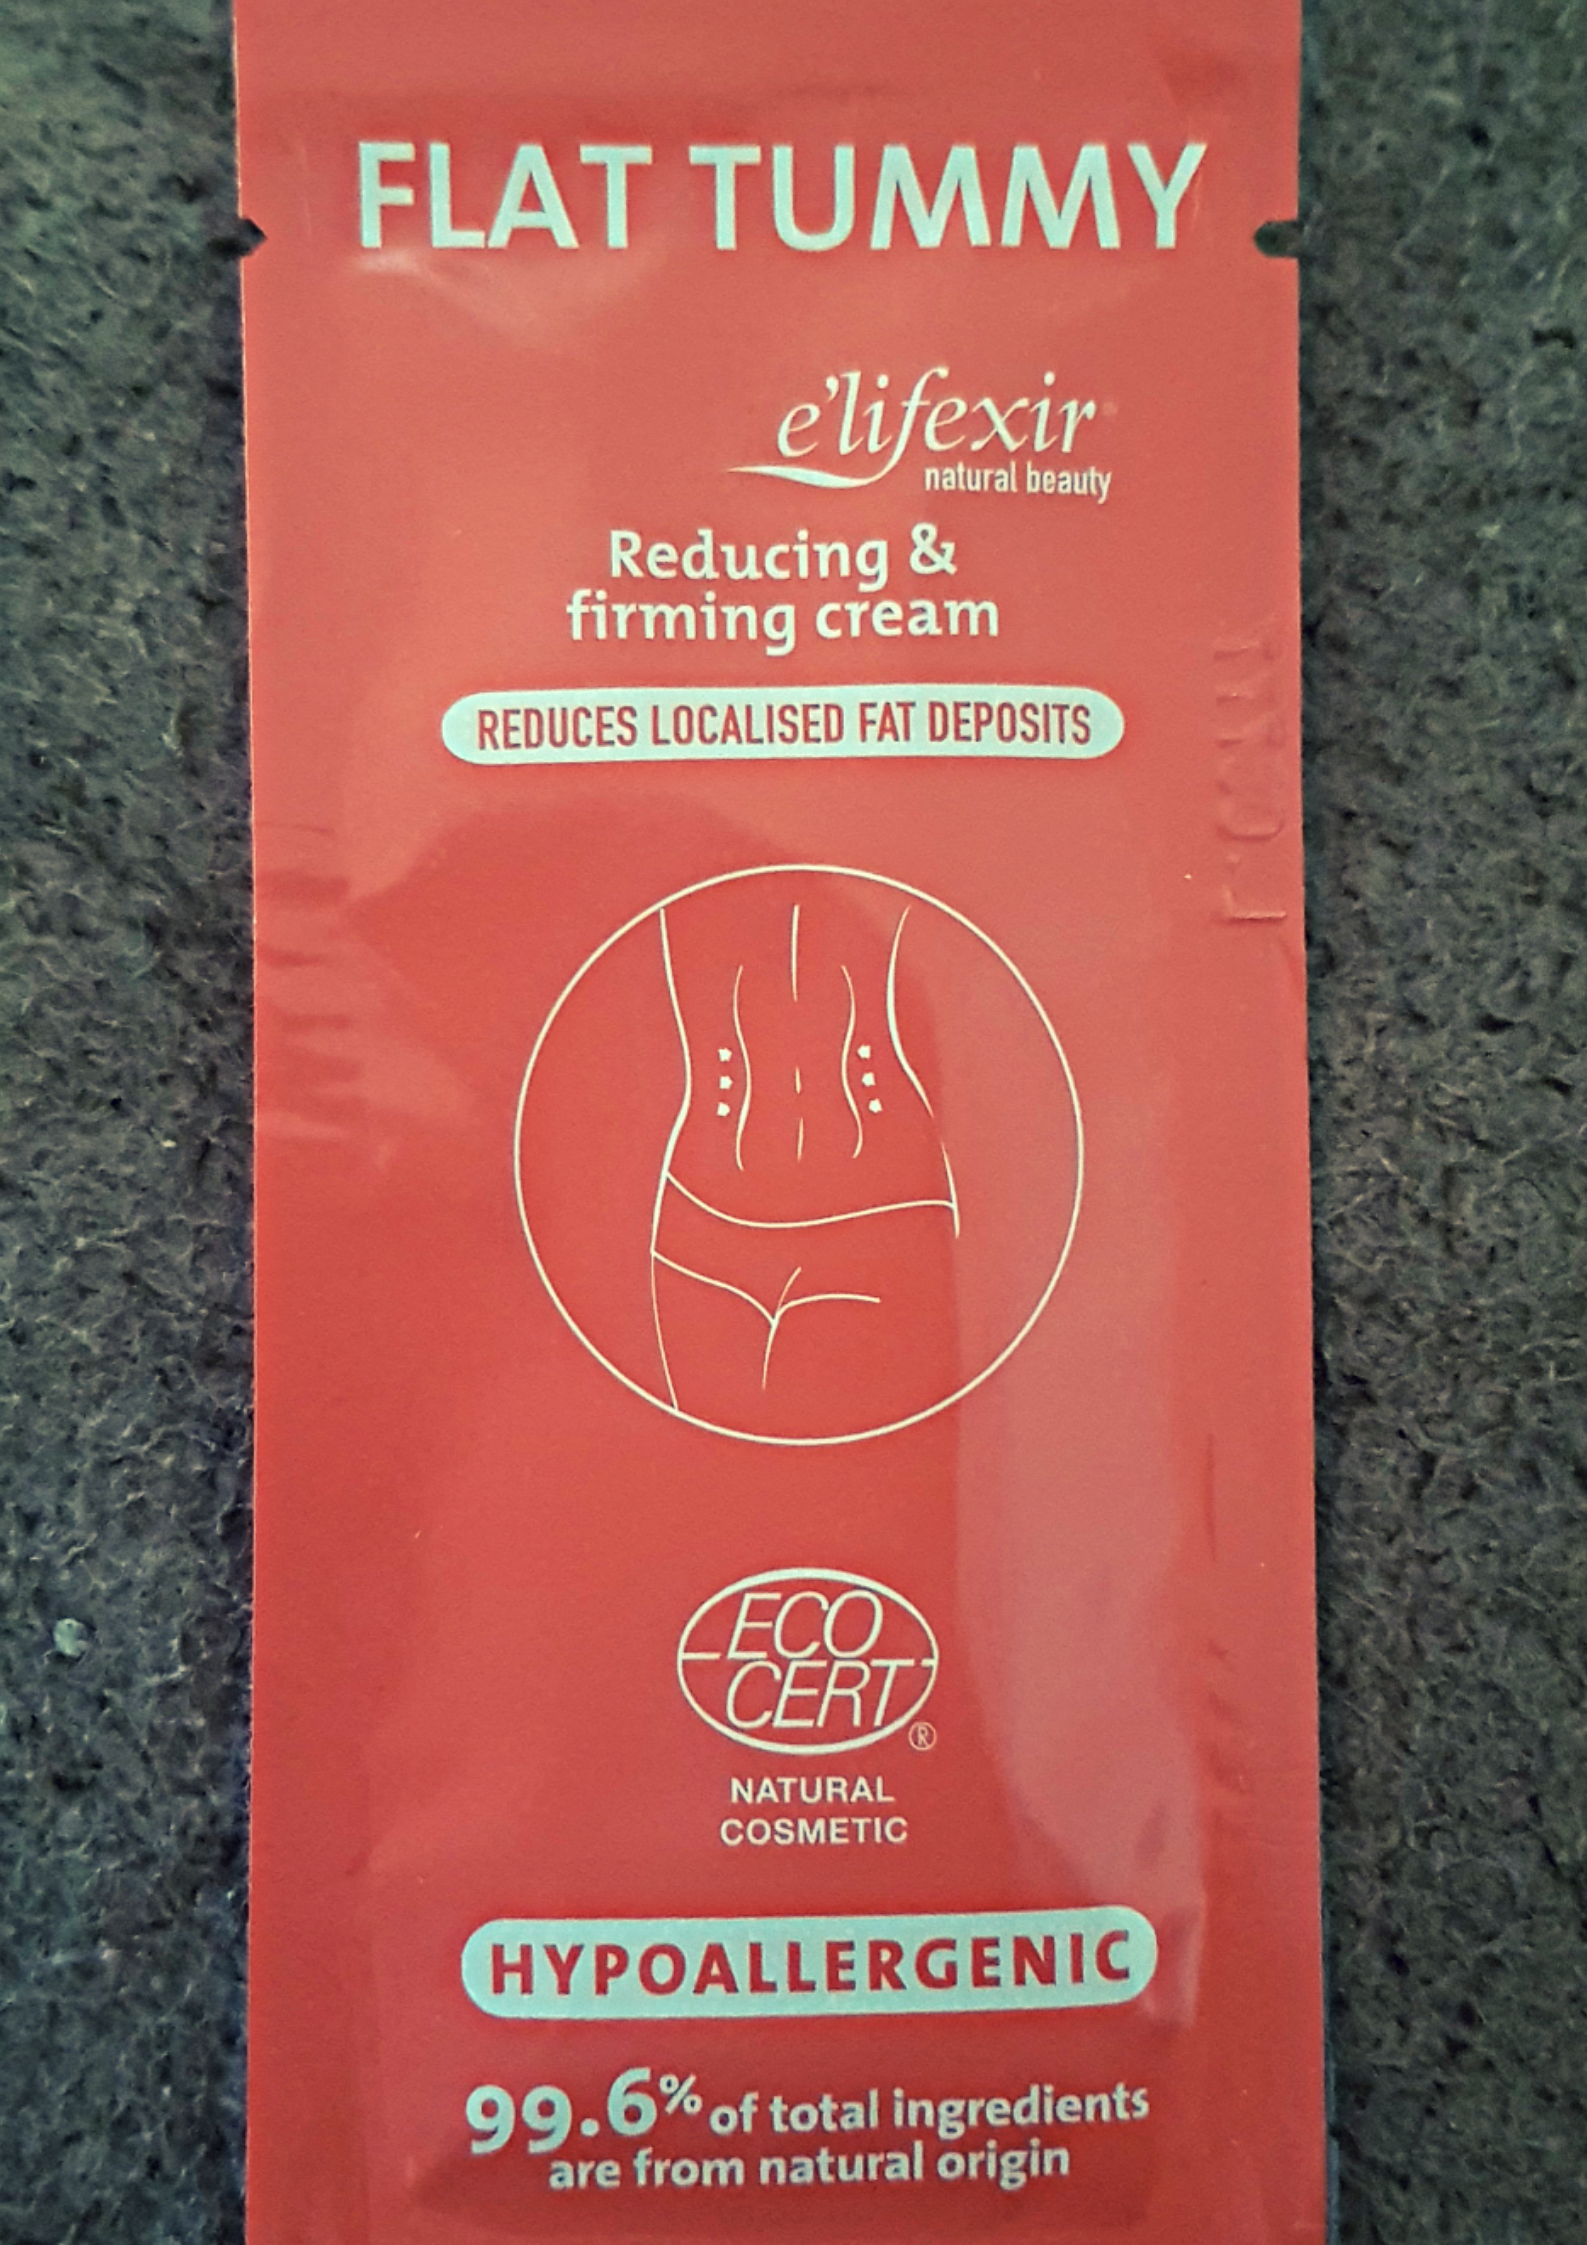 Red sachet with E'lifexir flat tummy cream written and a diagram of a slim tummy